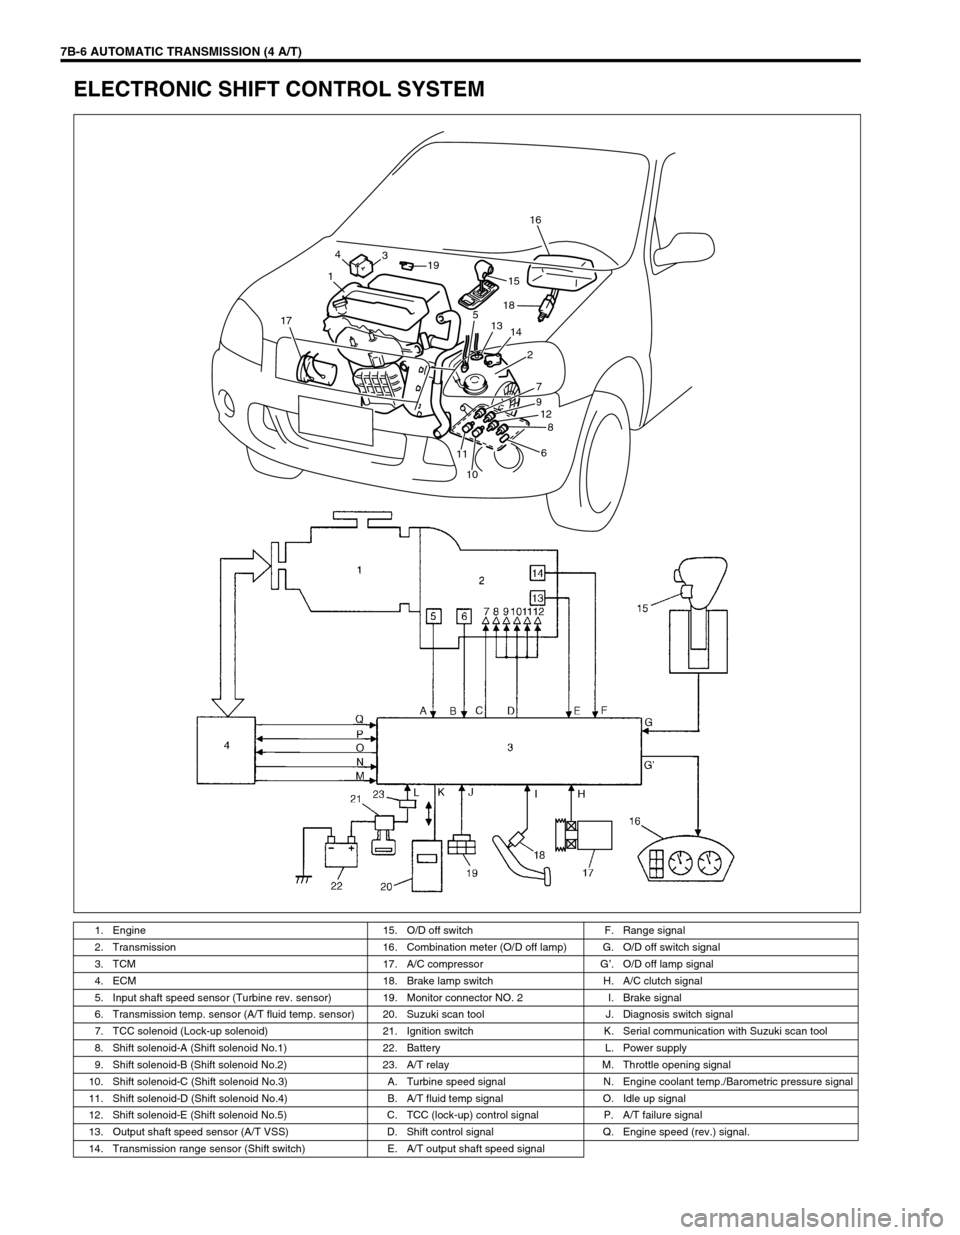 SUZUKI SWIFT 2000 1.G Transmission Service Workshop Manual 7B-6 AUTOMATIC TRANSMISSION (4 A/T)
ELECTRONIC SHIFT CONTROL SYSTEM
1. Engine  15. O/D off switch F. Range signal
2. Transmission 16. Combination meter (O/D off lamp) G. O/D off switch signal
3. TCM 1